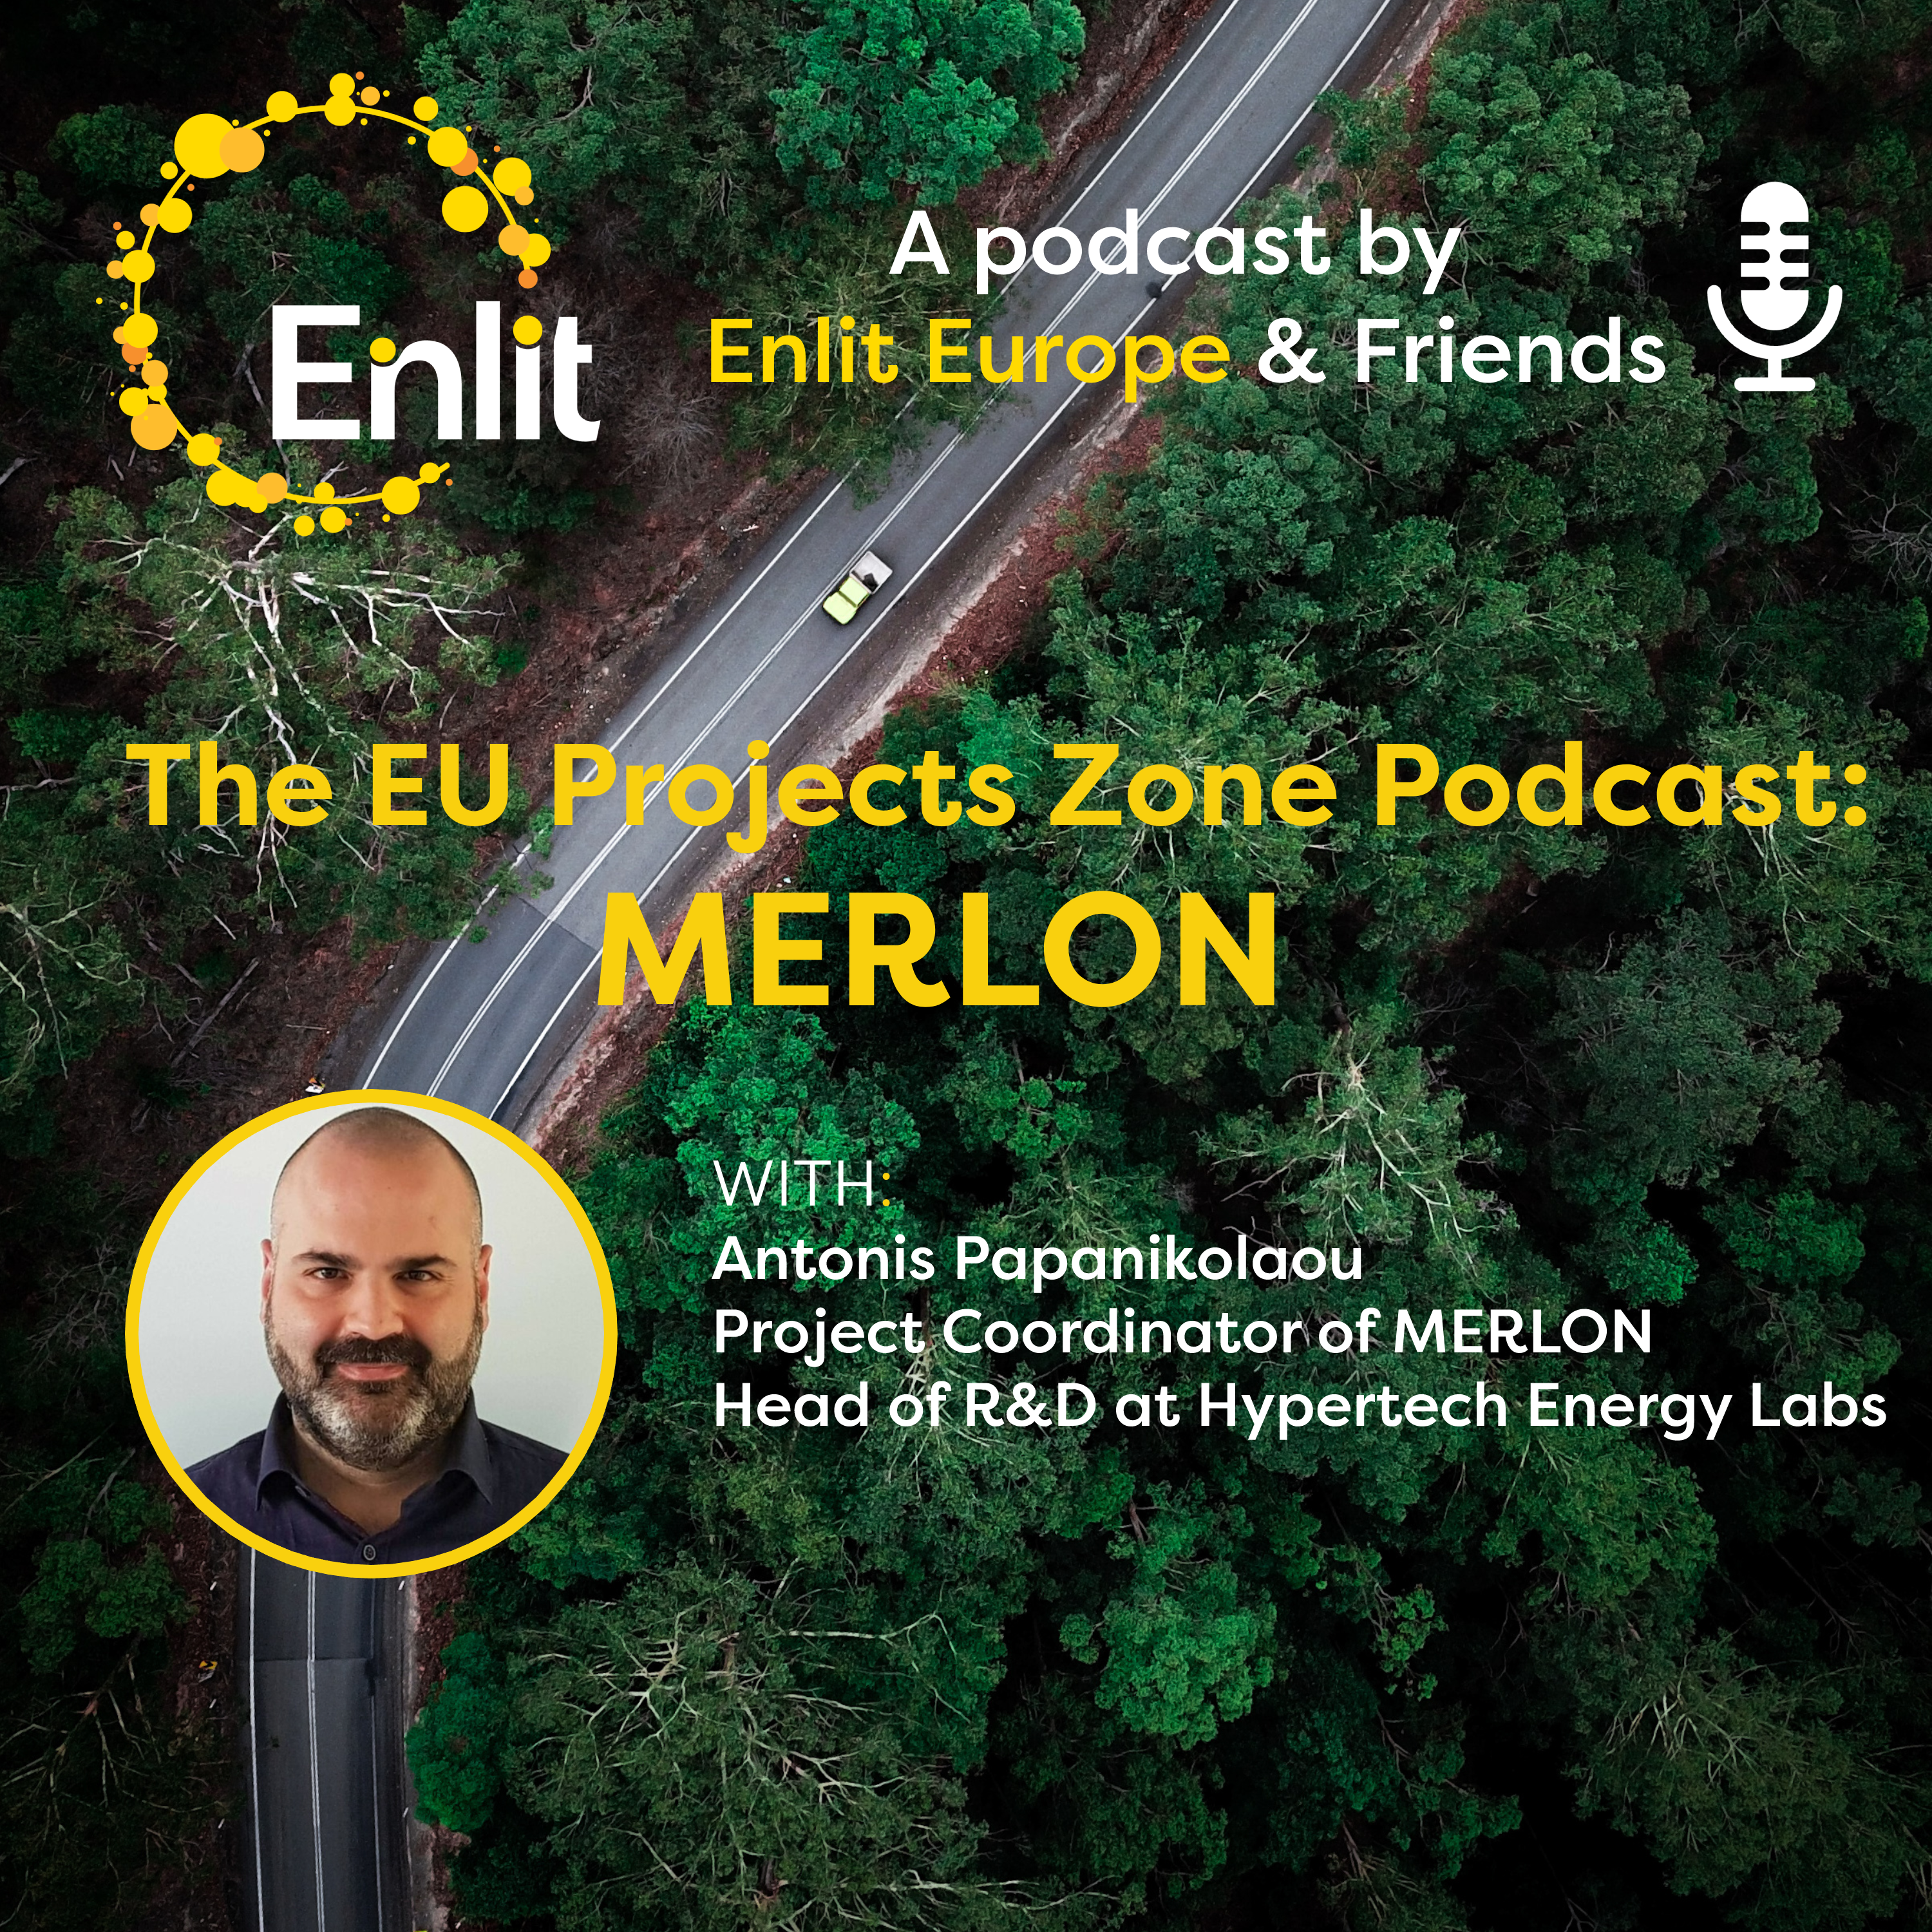 The EU Project Zone Podcast: Project MERLON with Antonis Papanikolaou